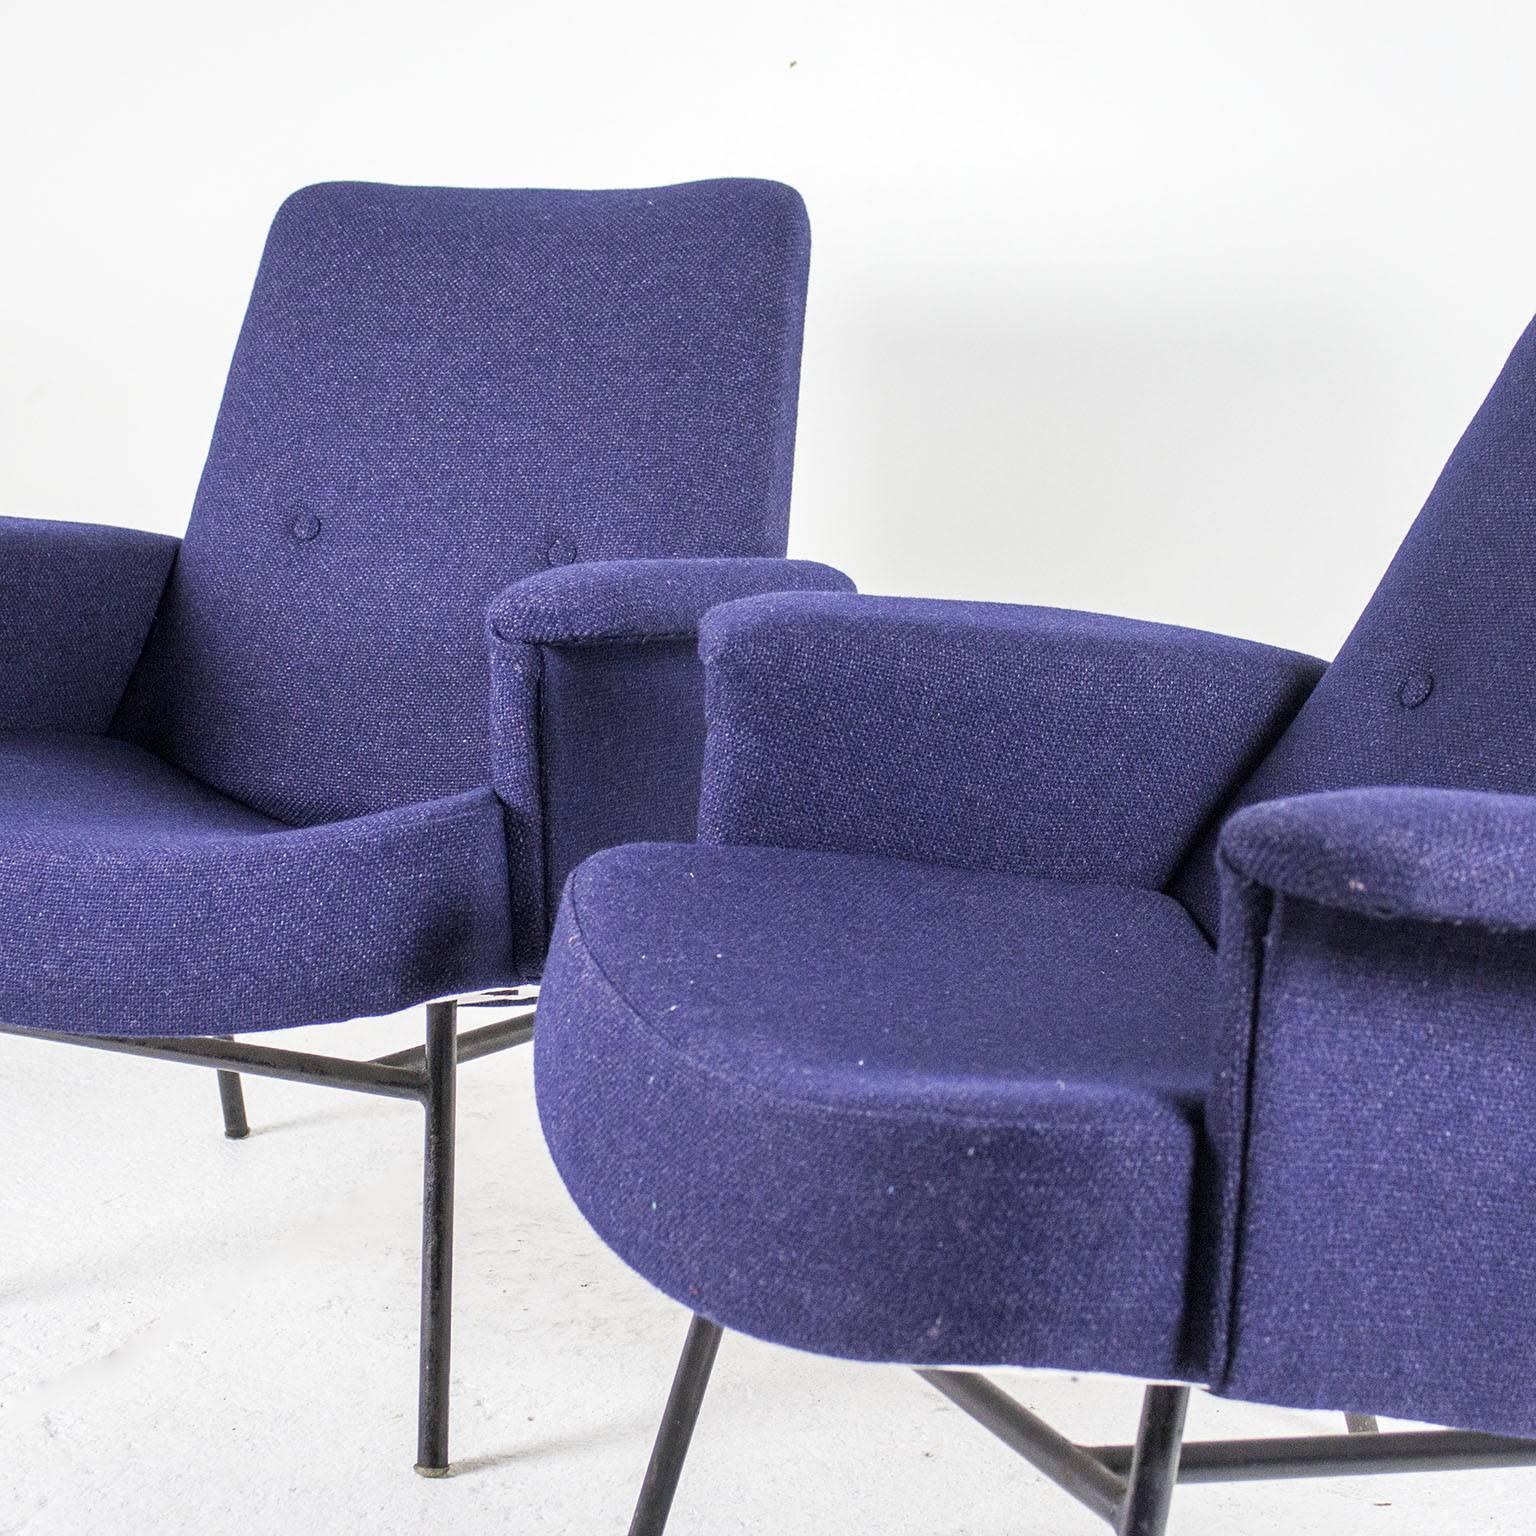 Mid-20th Century Pair of Armchairs SK660 by Pierre Guariche for Steiner, 1950 For Sale